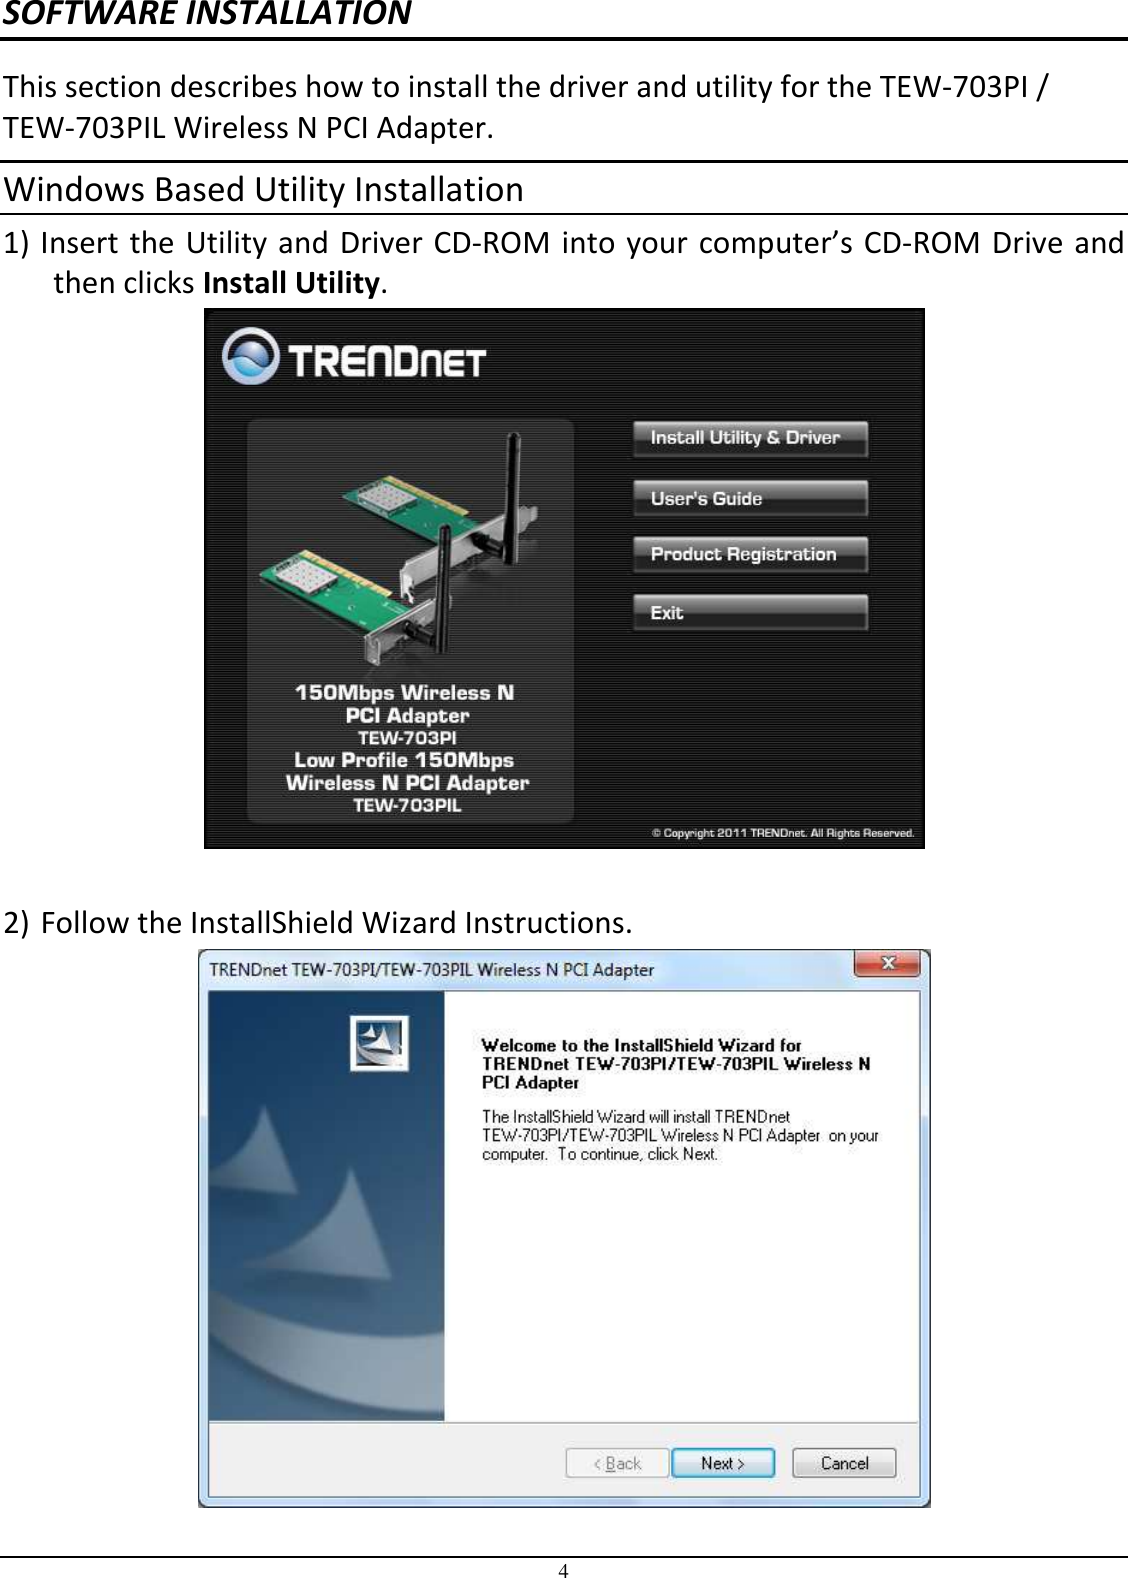 4 SOFTWARE INSTALLATION This section describes how to install the driver and utility for the TEW-703PI / TEW-703PIL Wireless N PCI Adapter. Windows Based Utility Installation 1) Insert the Utility and Driver CD-ROM into your computer’s CD-ROM Drive and then clicks Install Utility.   2) Follow the InstallShield Wizard Instructions. 